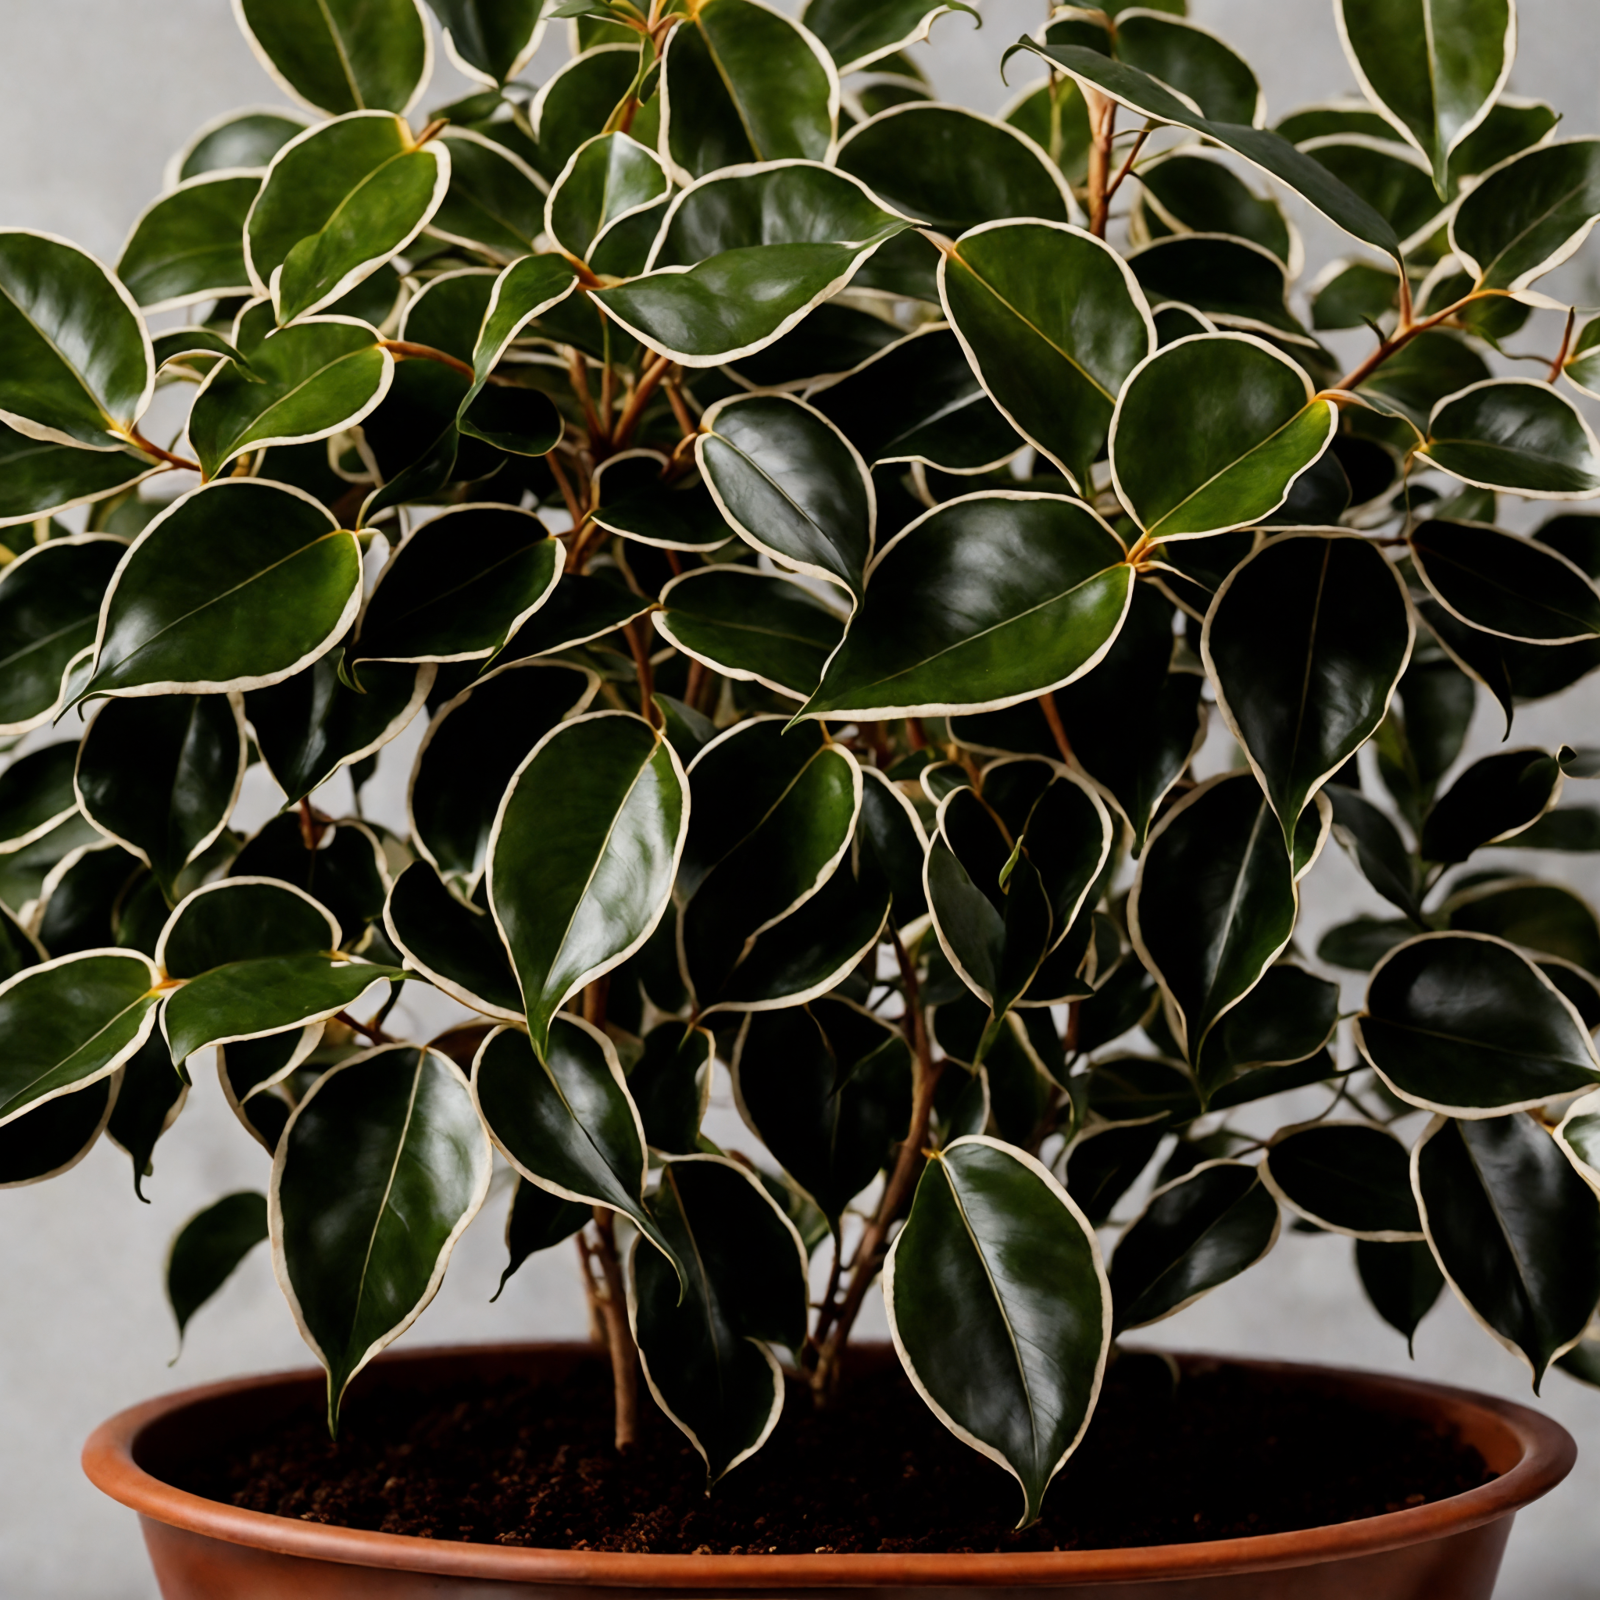 Ficus benjamina in a pot on the floor, with lush green leaves, clear lighting, against a dark background.